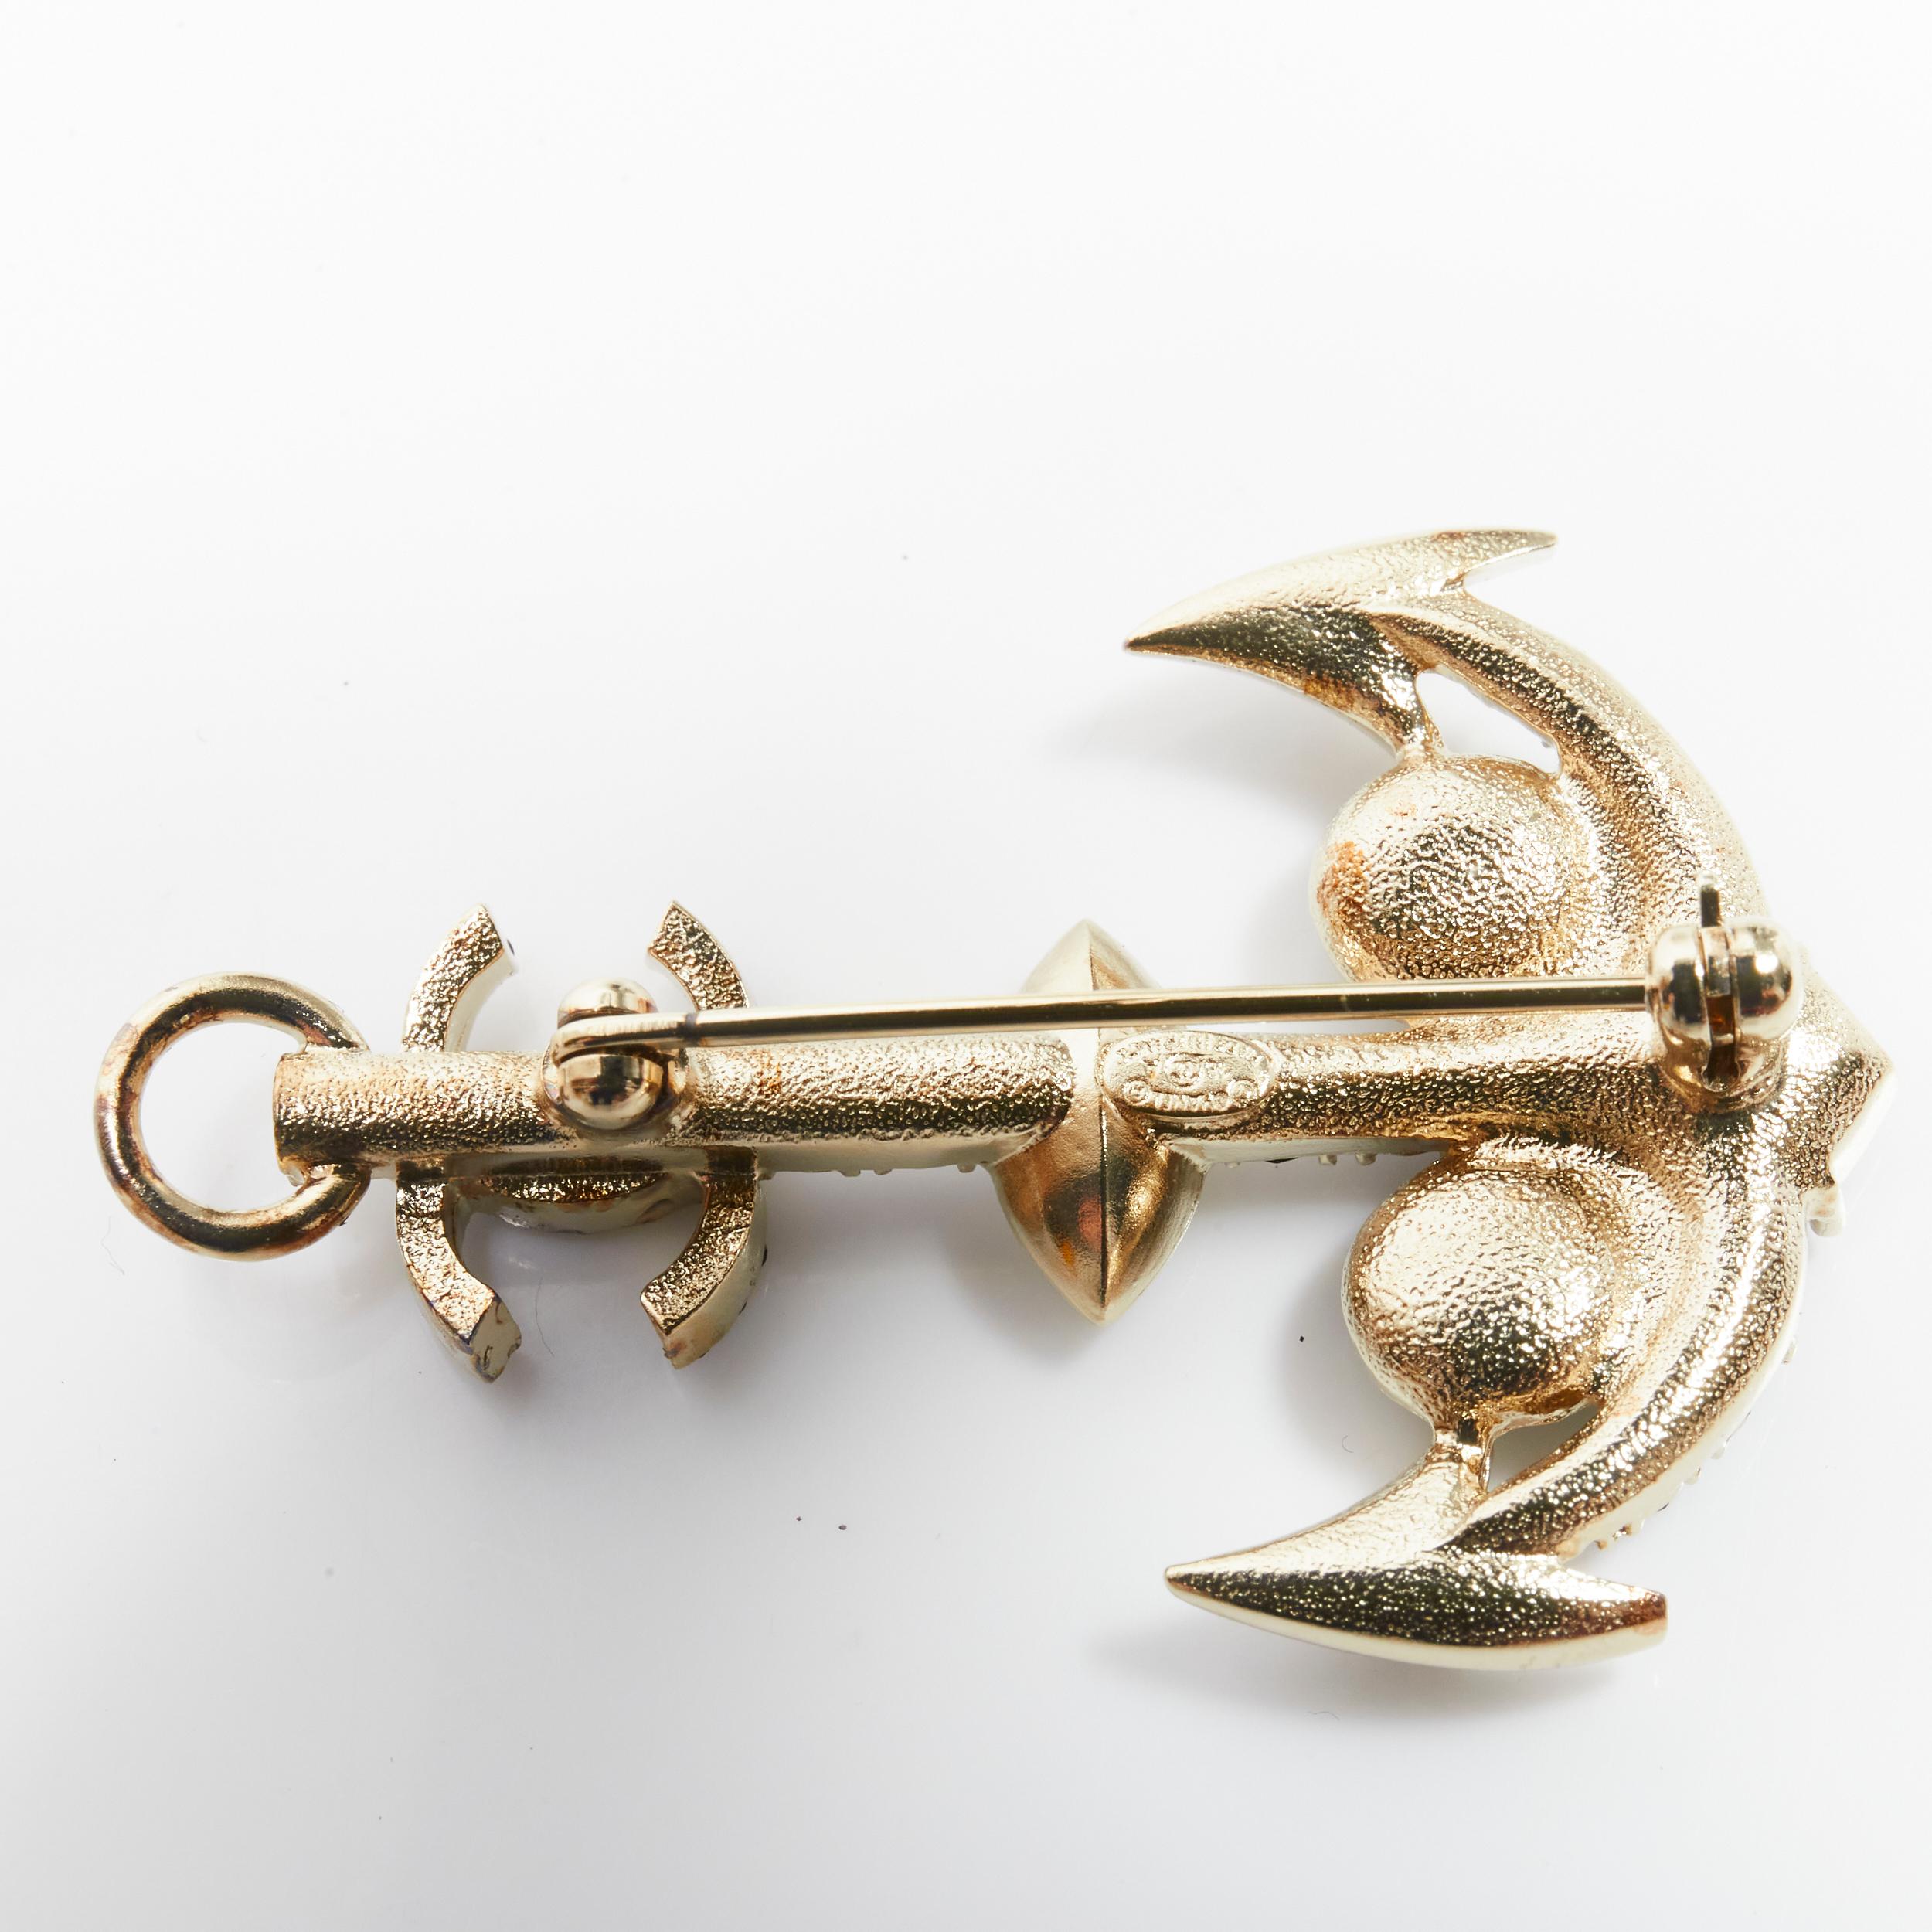 black and gold brooch